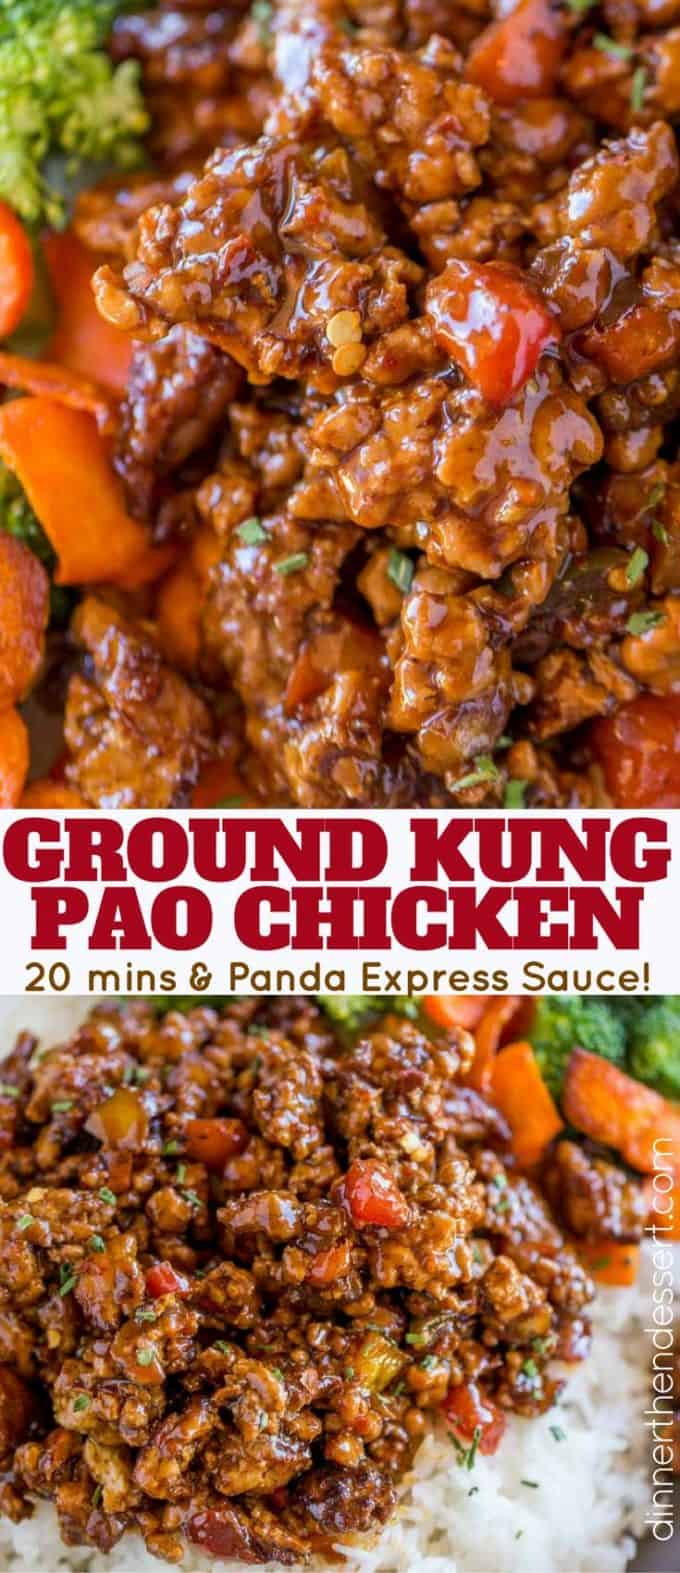 The WHOLE FAMILY loved this Ground Kung Pao Chicken! Plus the veggies were so finely minced they were hidden! Made with Panda Express Copycat Sauce!